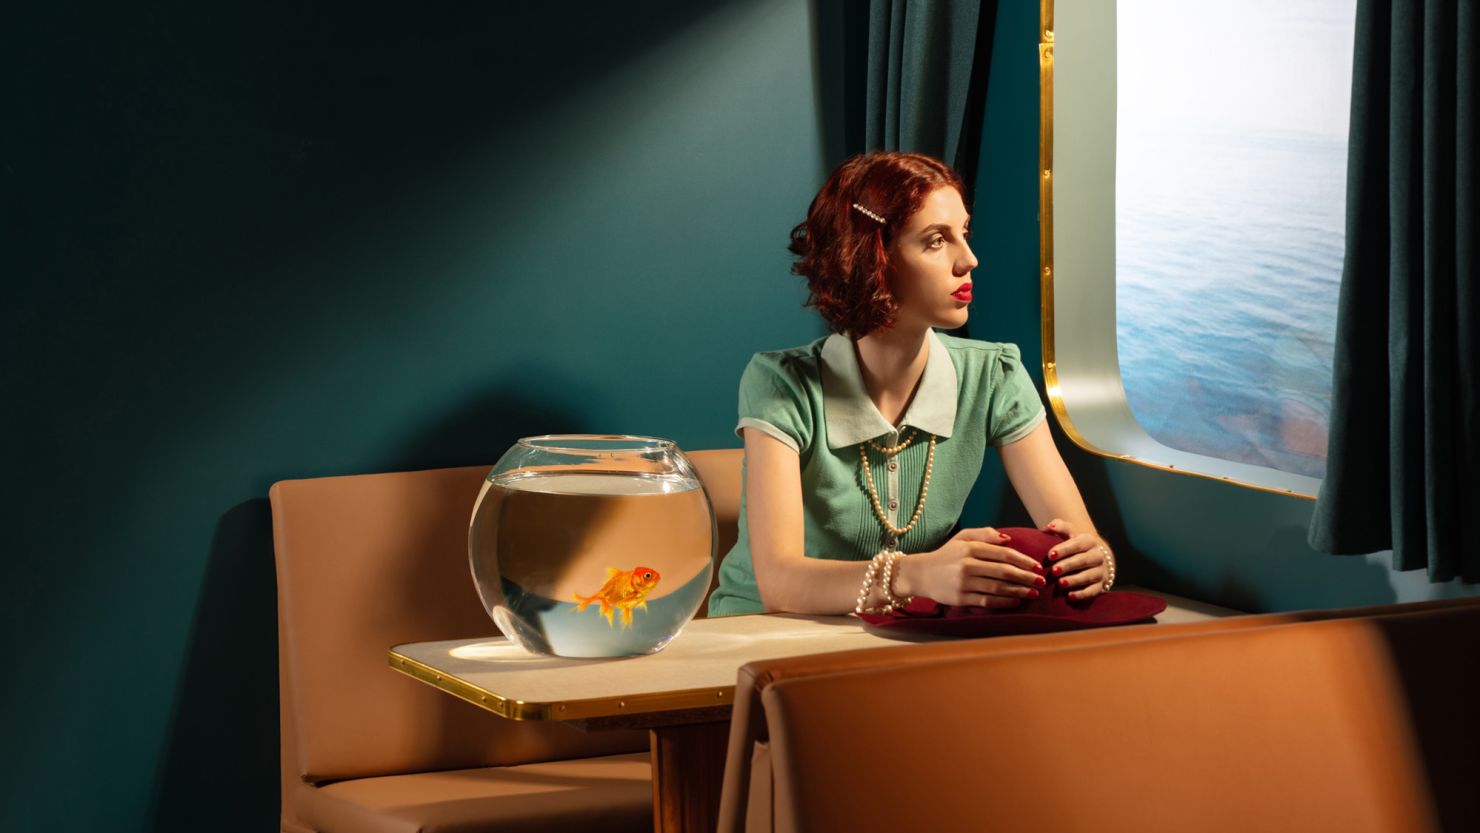 An image by German photographer Horst Kistner, shortlisted in the Sony World Photography Awards' portfolio category.